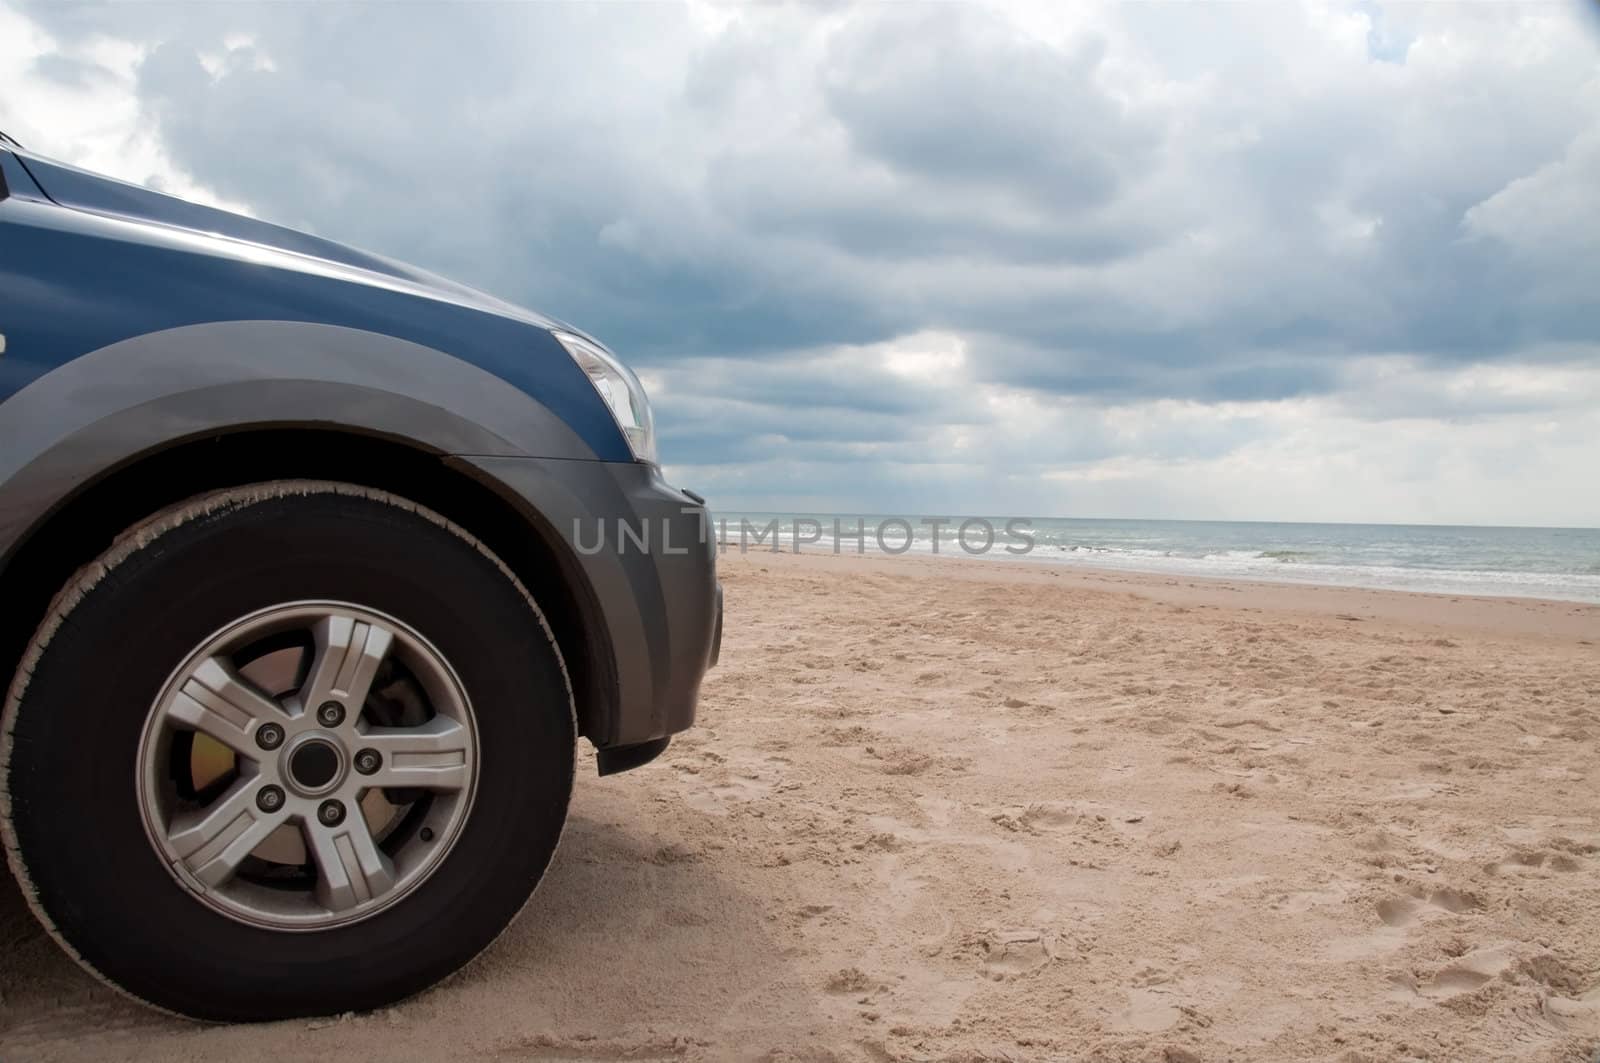 The front of a car watching the sea